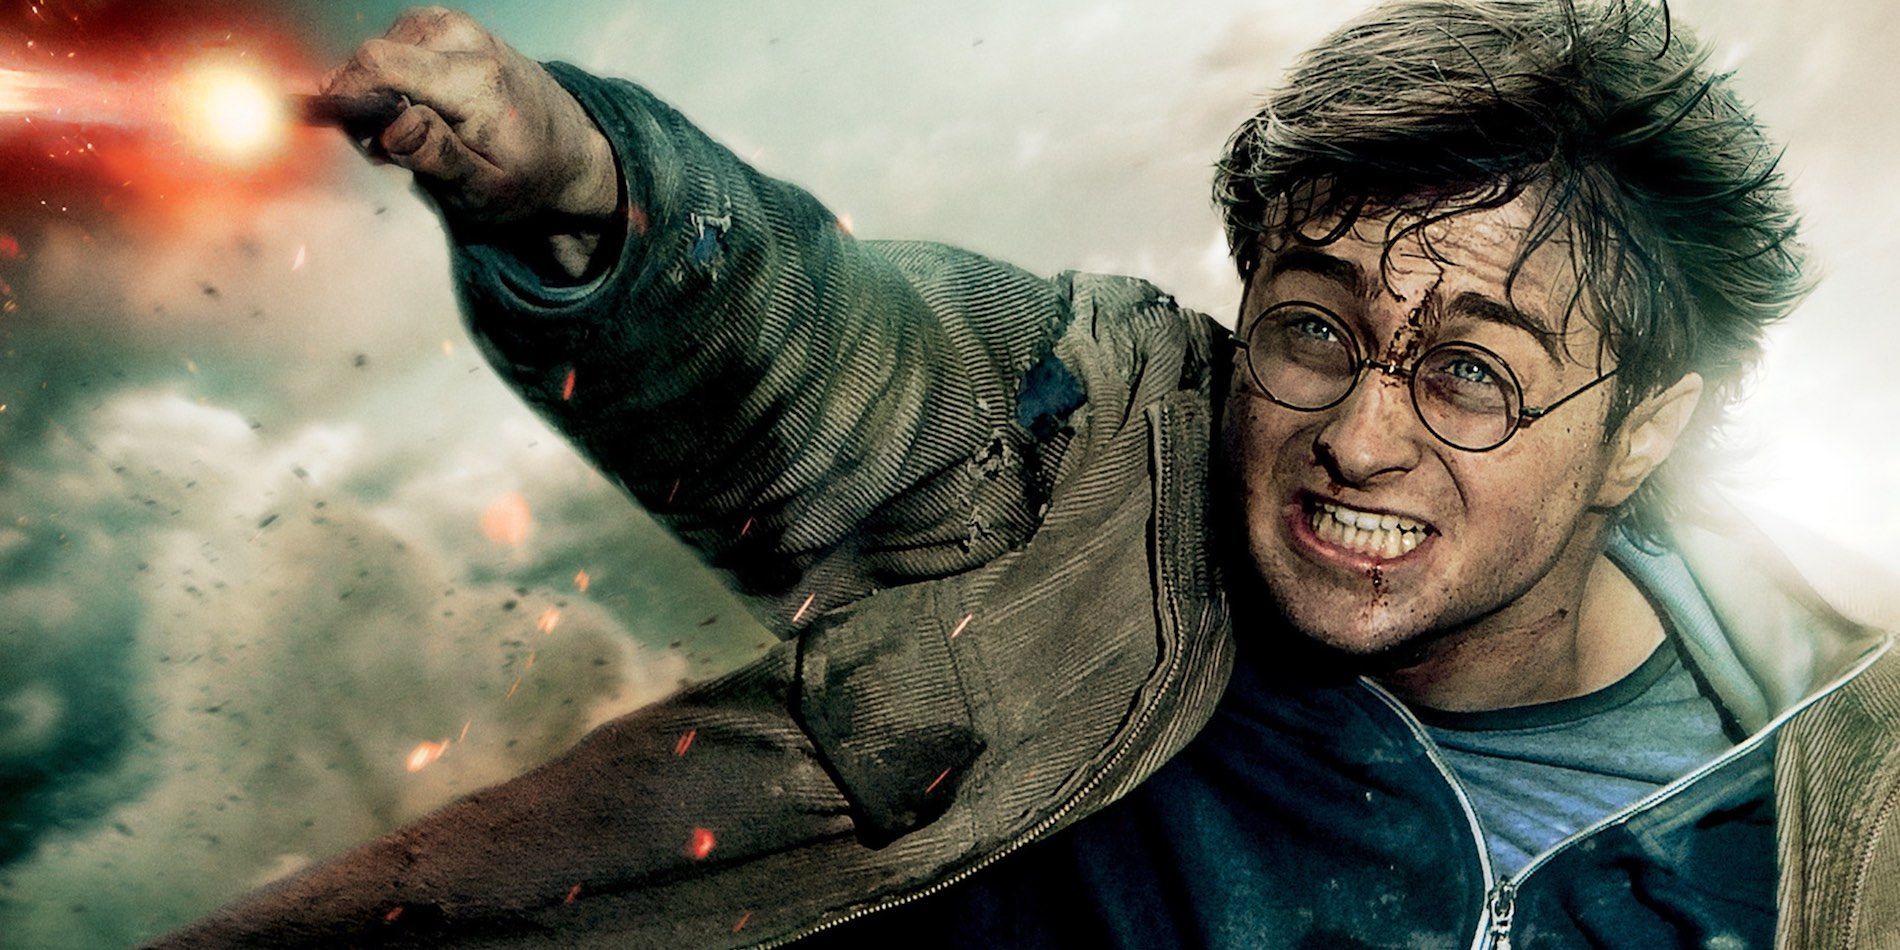 Daniel Radcliffe in Harry Potter and the Deathly Hallows Part 2